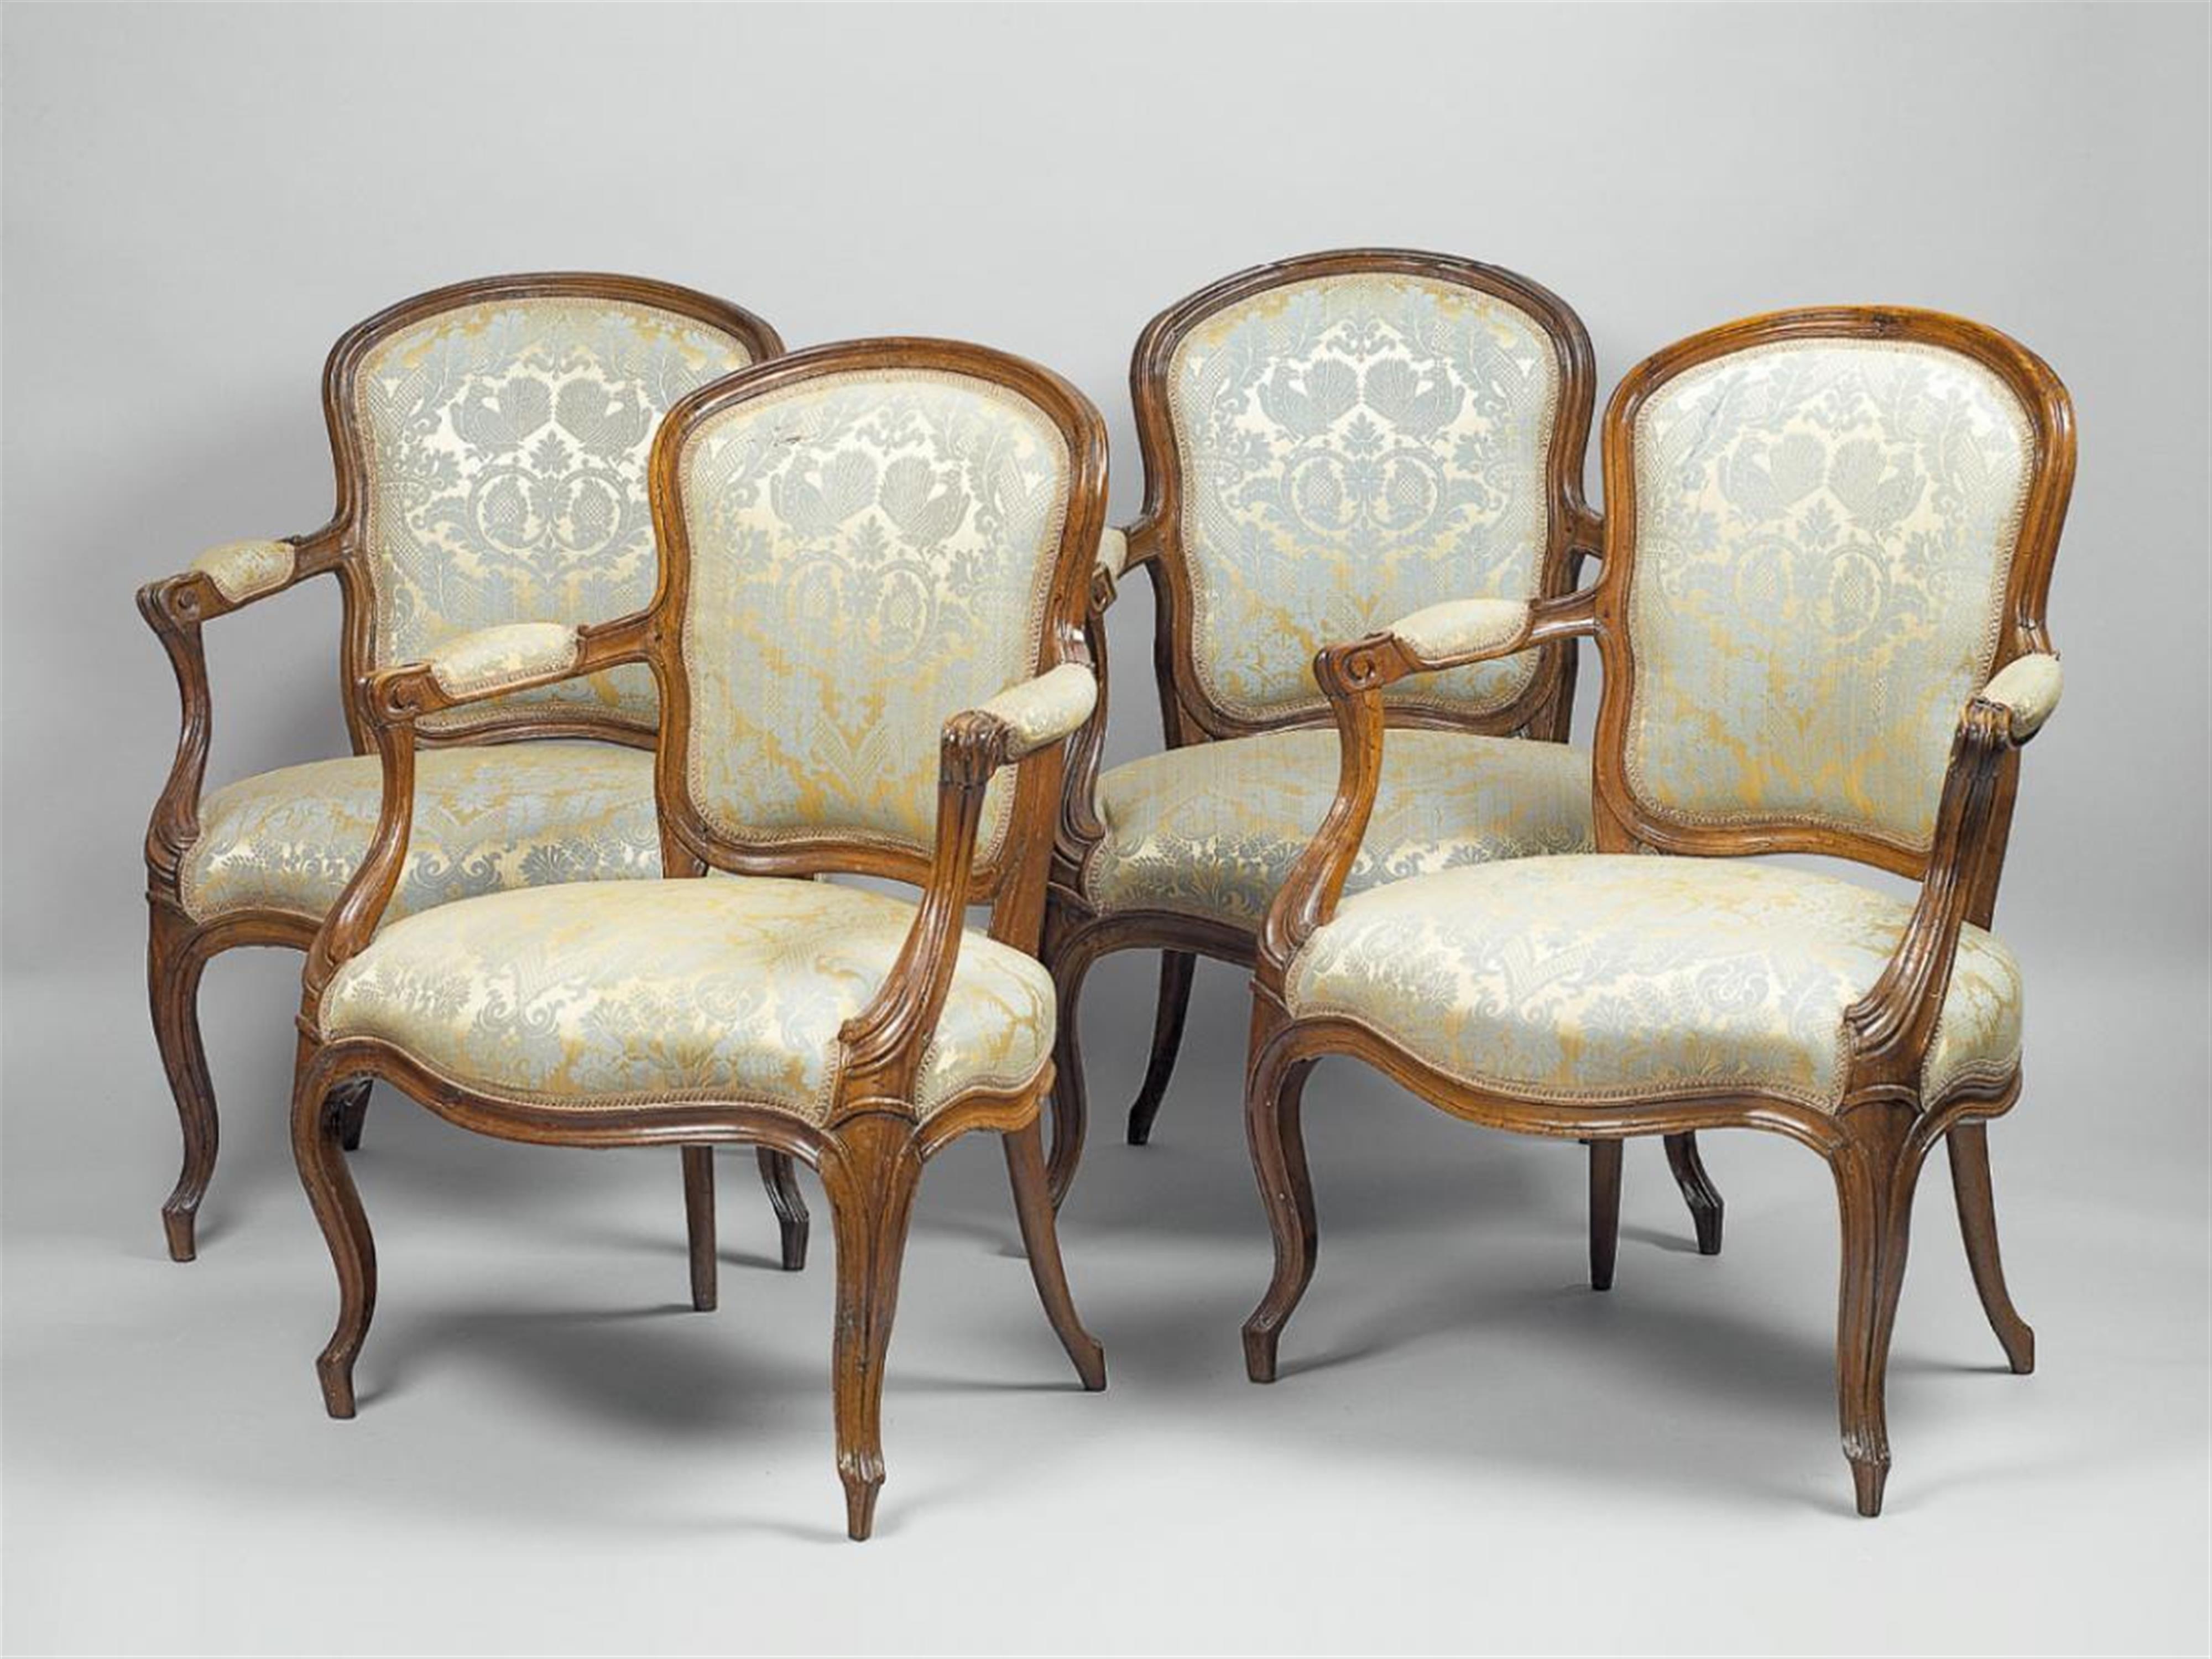 Four French Louis XV period fauteuils - image-1